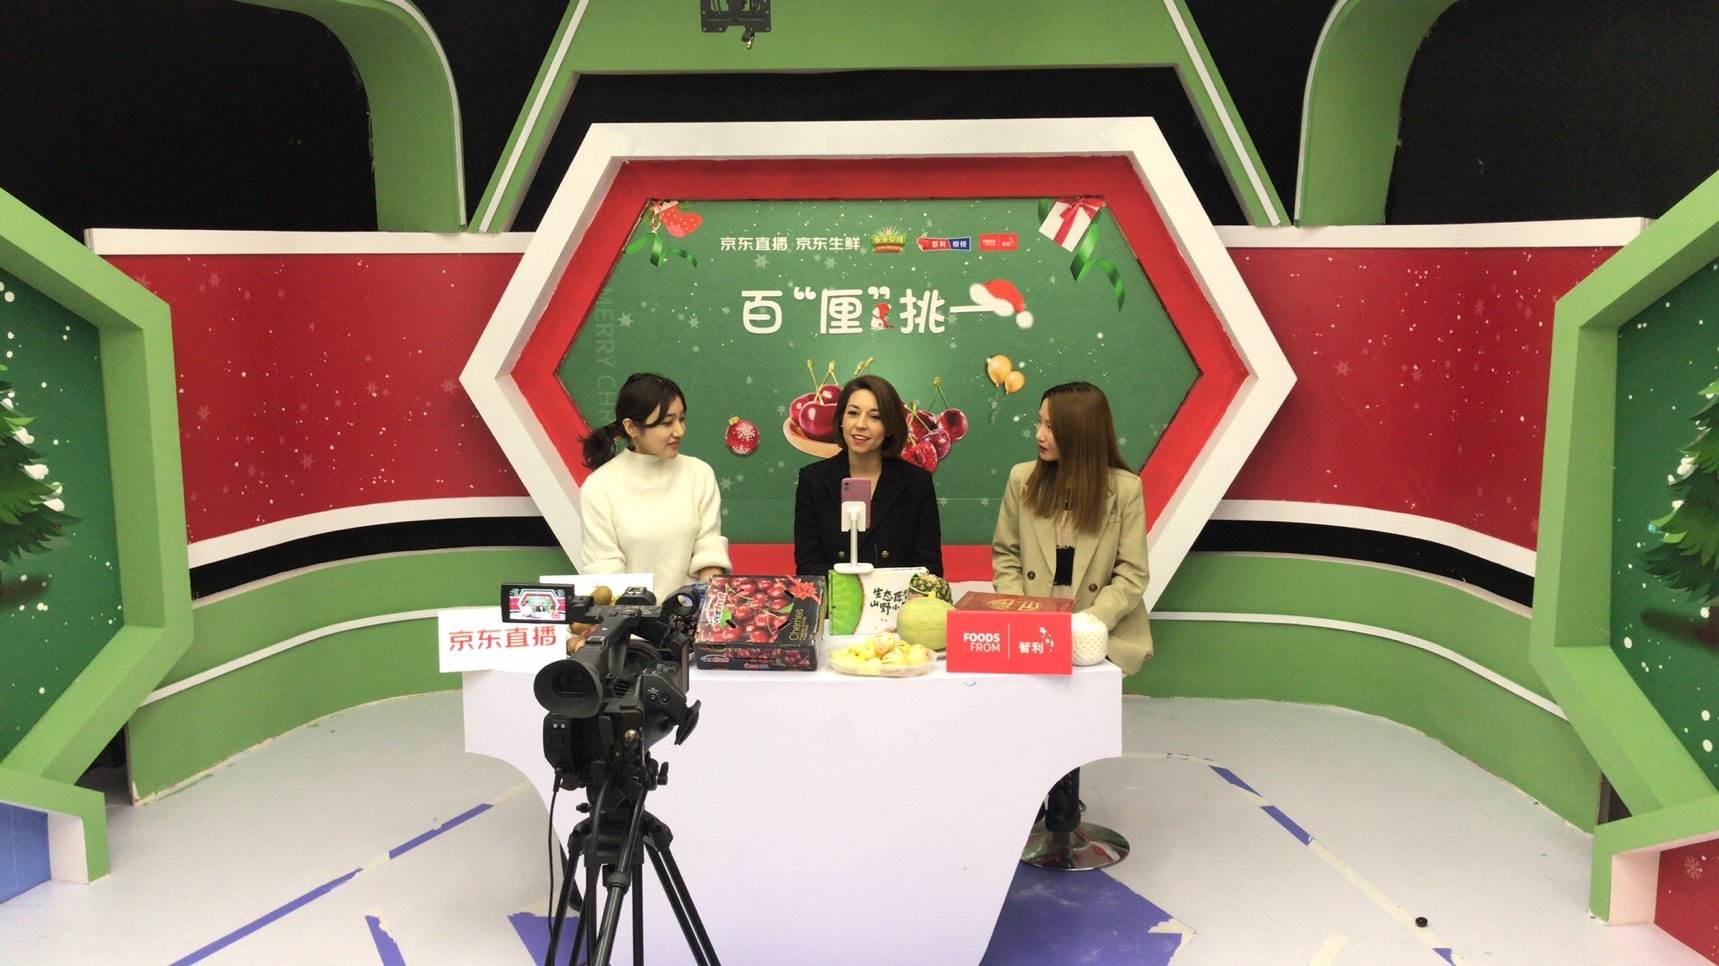 JD Fresh held a livestream to promote Chilean cherries, New Zealand kiwis, Philippine pineapples, Thai coconuts and more.